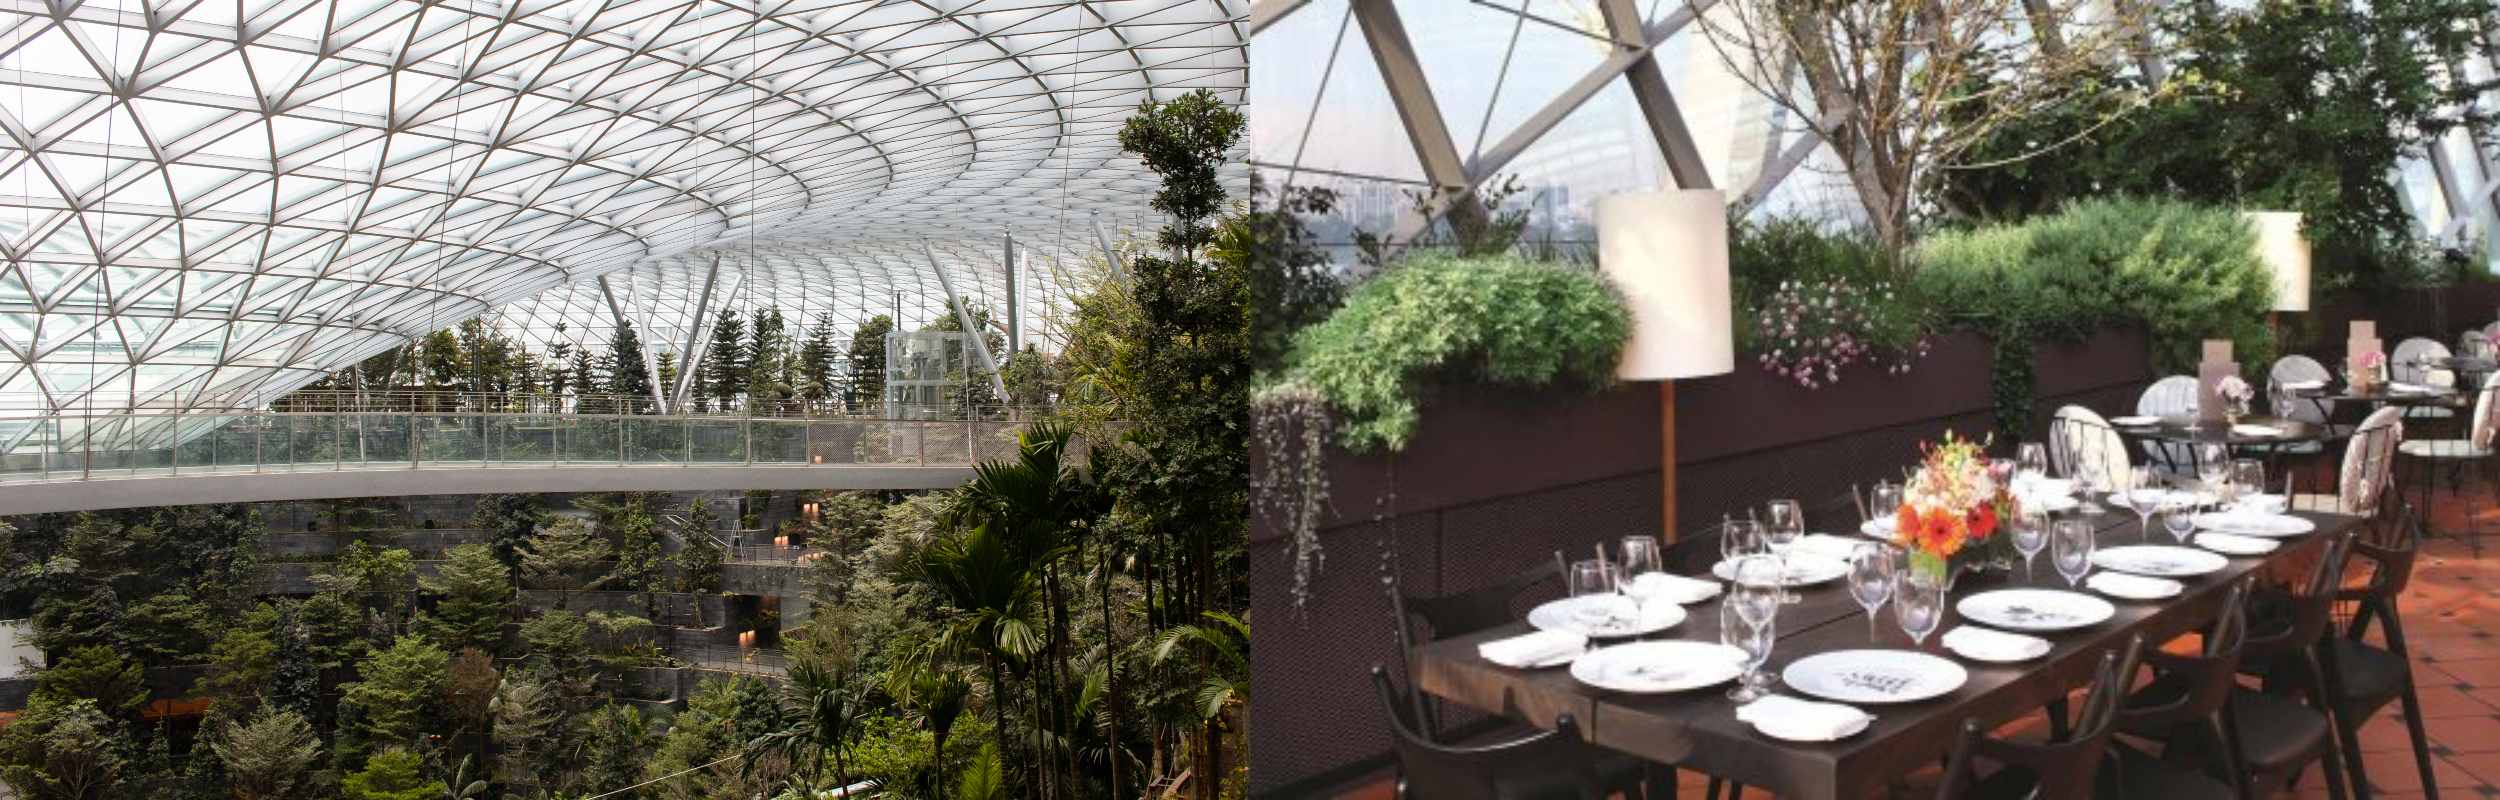 Jewel Changi Airport’s al-fresco dining area and Gardens by the Bay’s Pollen restaurant